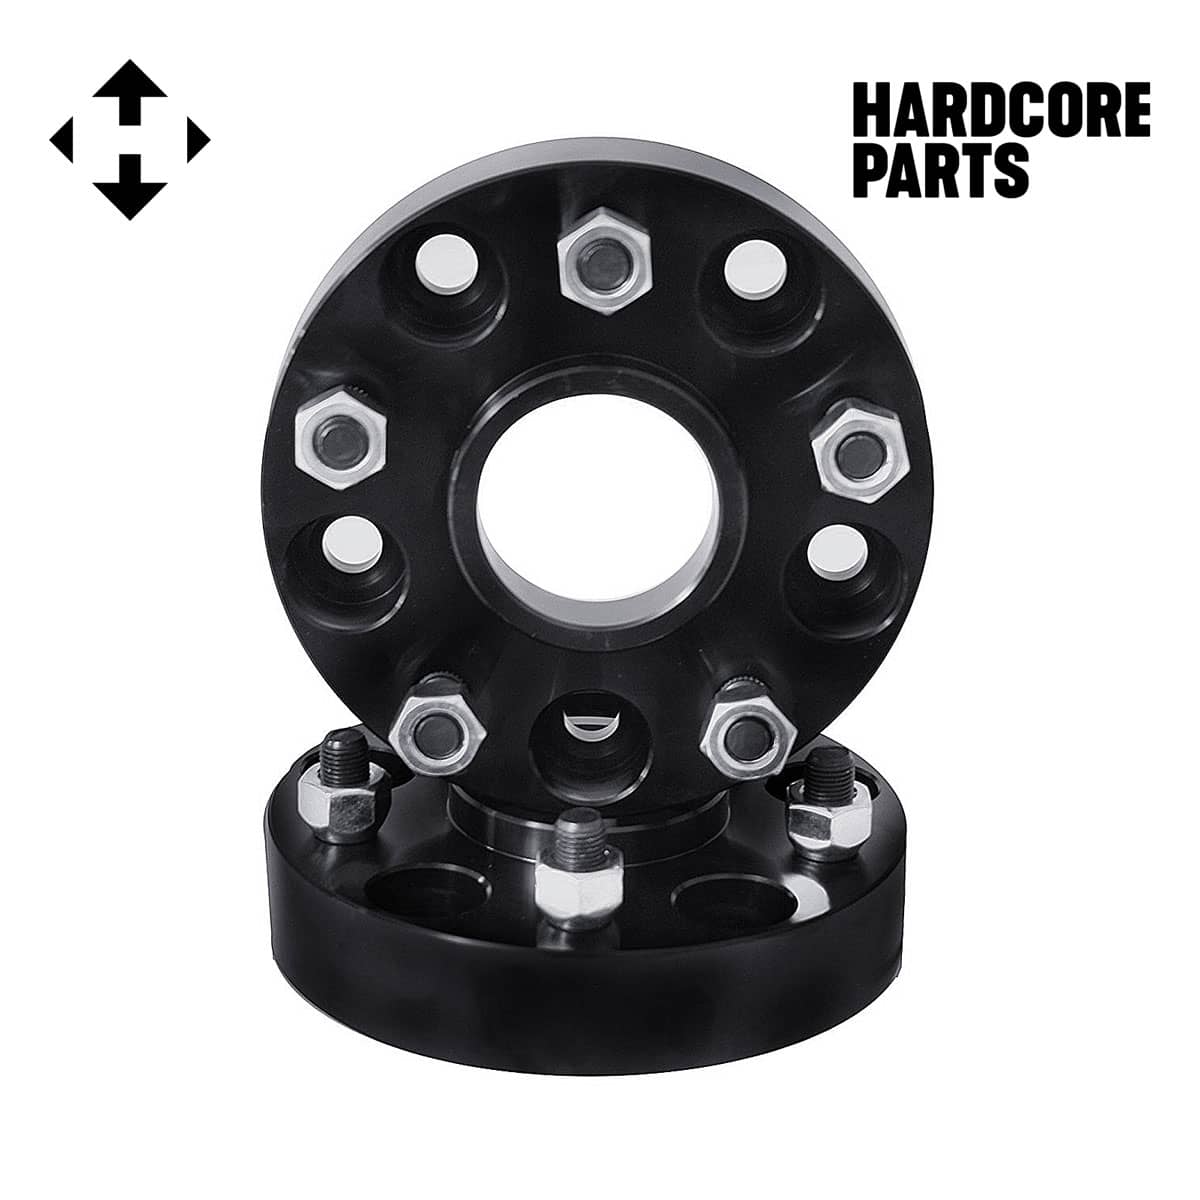 Buy 2 QTY Black Wheel Spacers Adapters 3  inch per side fits all    Hubcentric vehicle to  wheel bolt patterns with 12 - RH  threads - Jeep Wrangler TJ